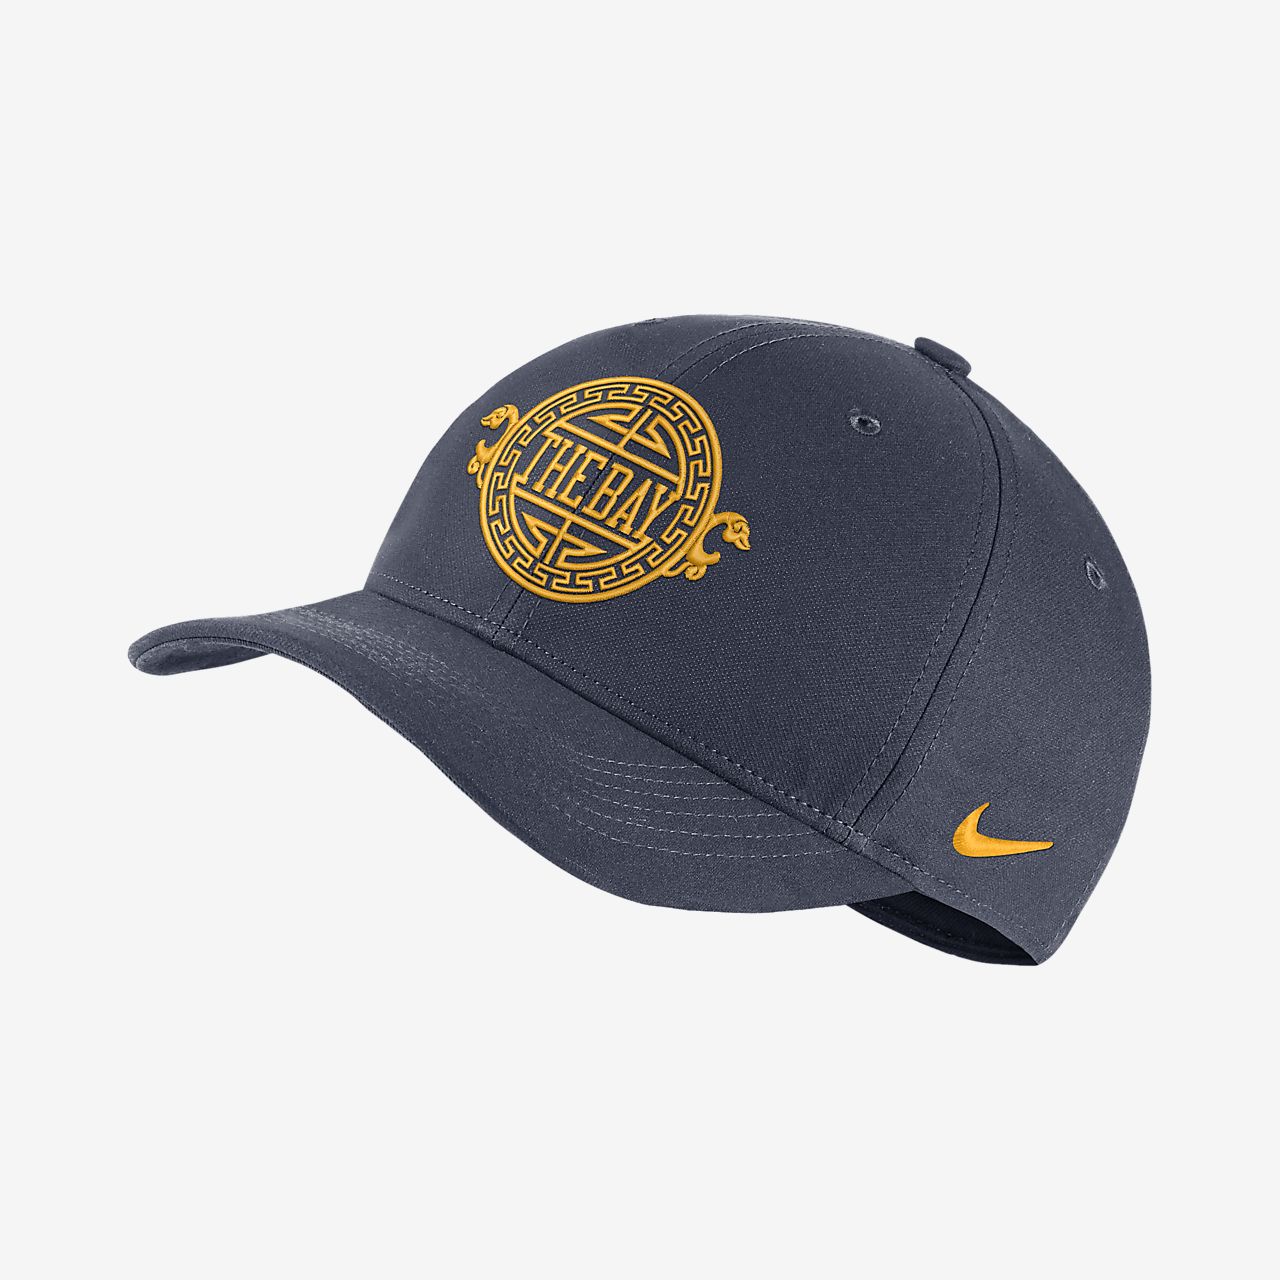 sweat golden state warriors city edition nike